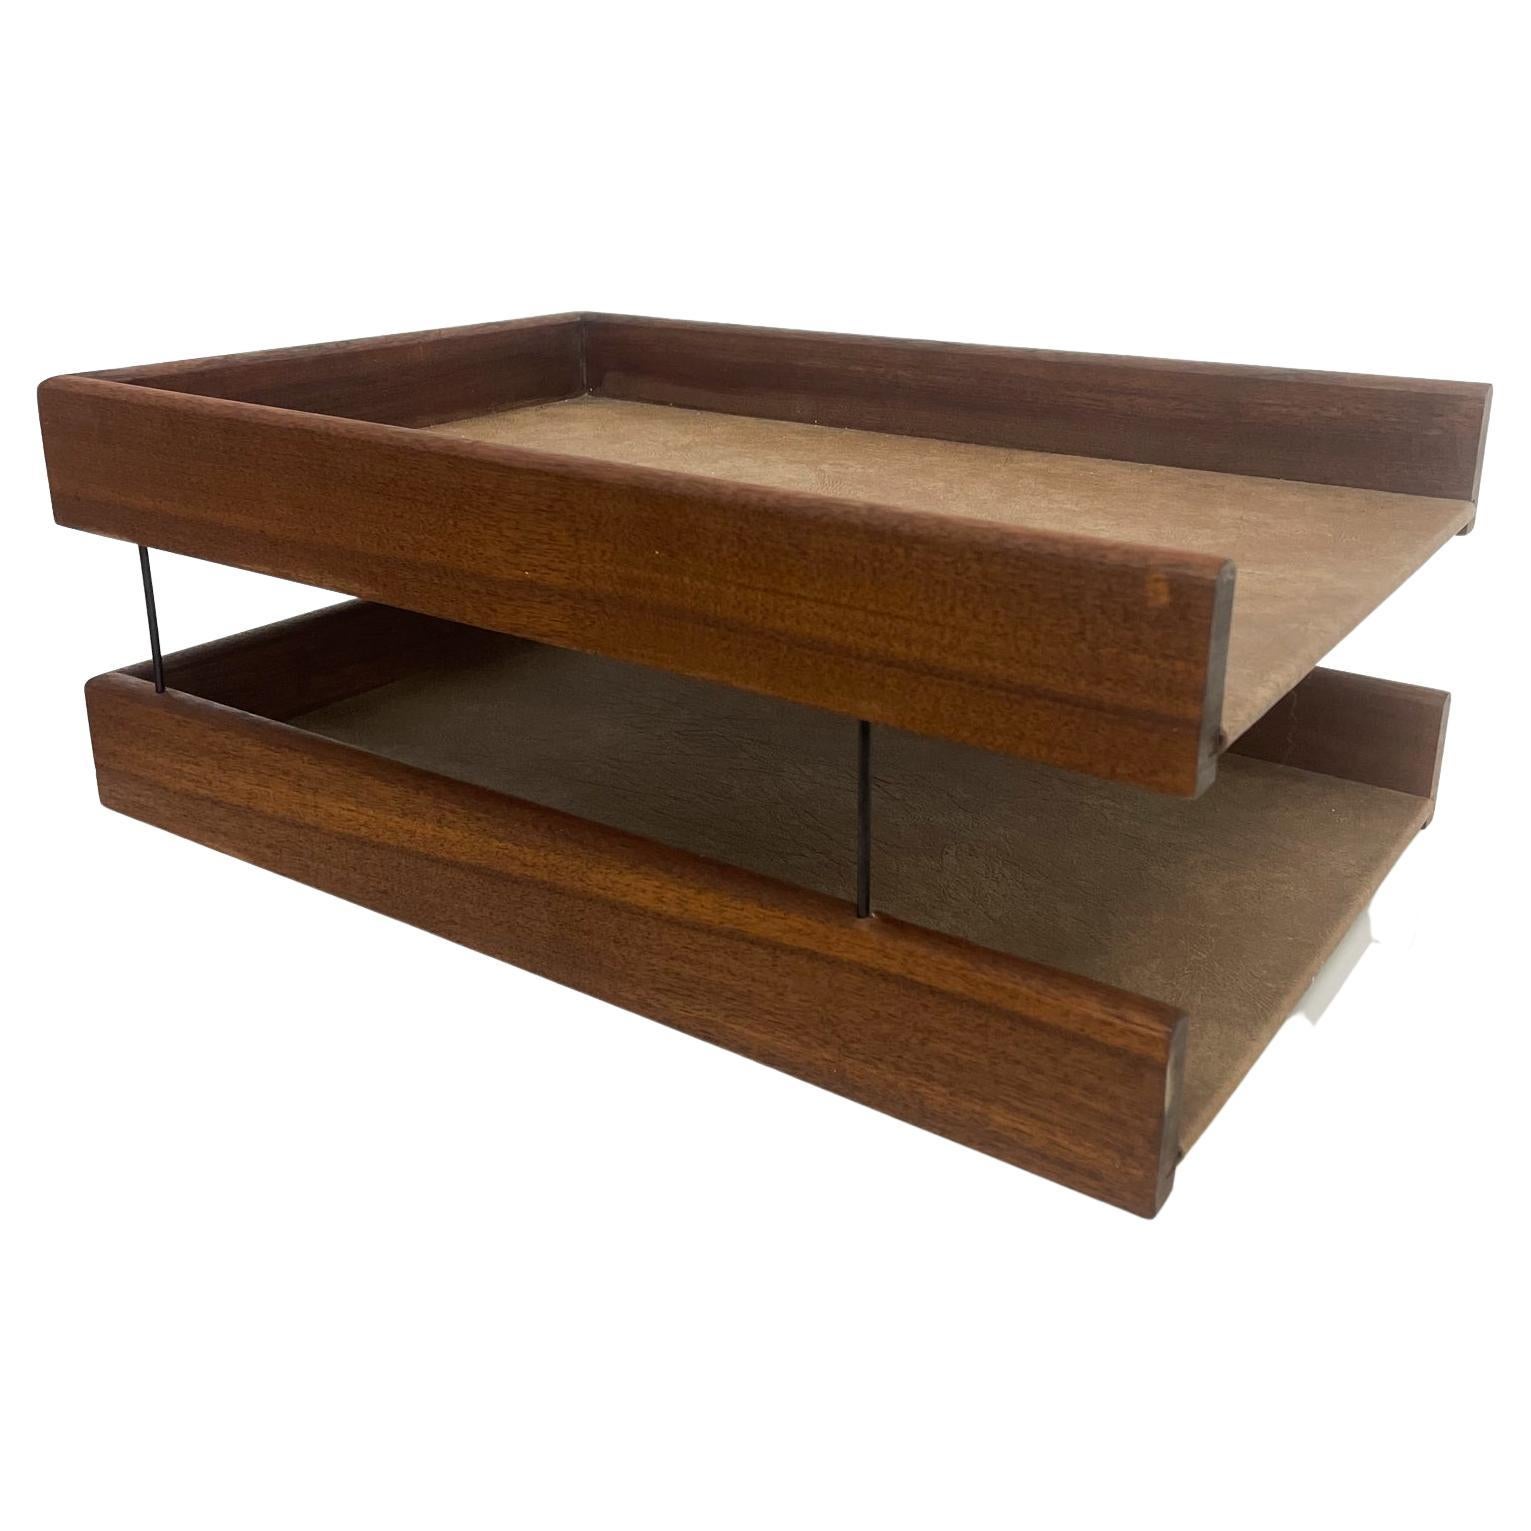 1970s Modern Two Tier Paper Tray Solid Walnut Wood and Bronze Desk Accessory